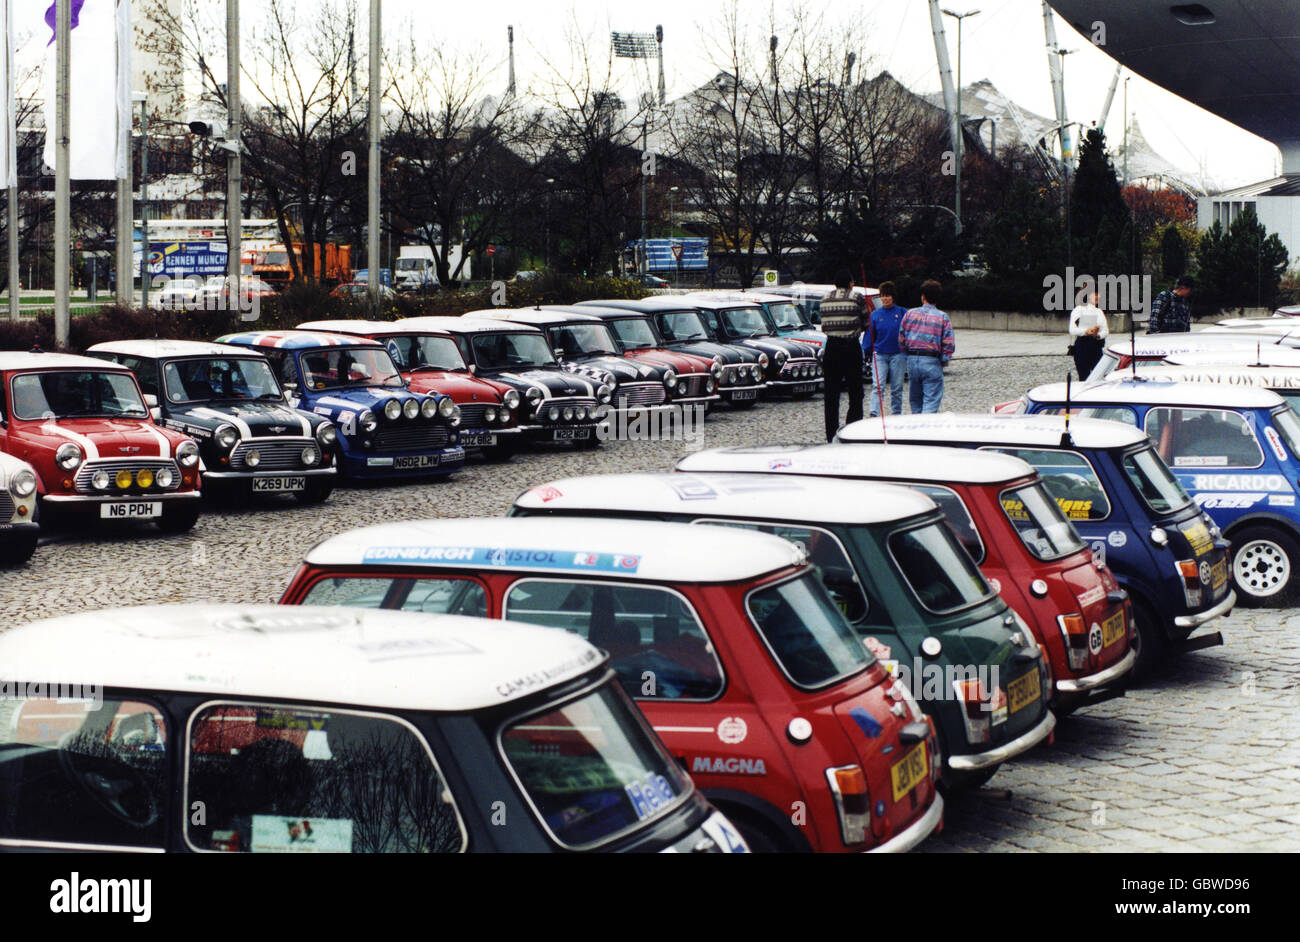 transport / transportation, cars, vehicle variants, Rover Mini Cooper, aid meeting, 1996, Additional-Rights-Clearences-Not Available Stock Photo